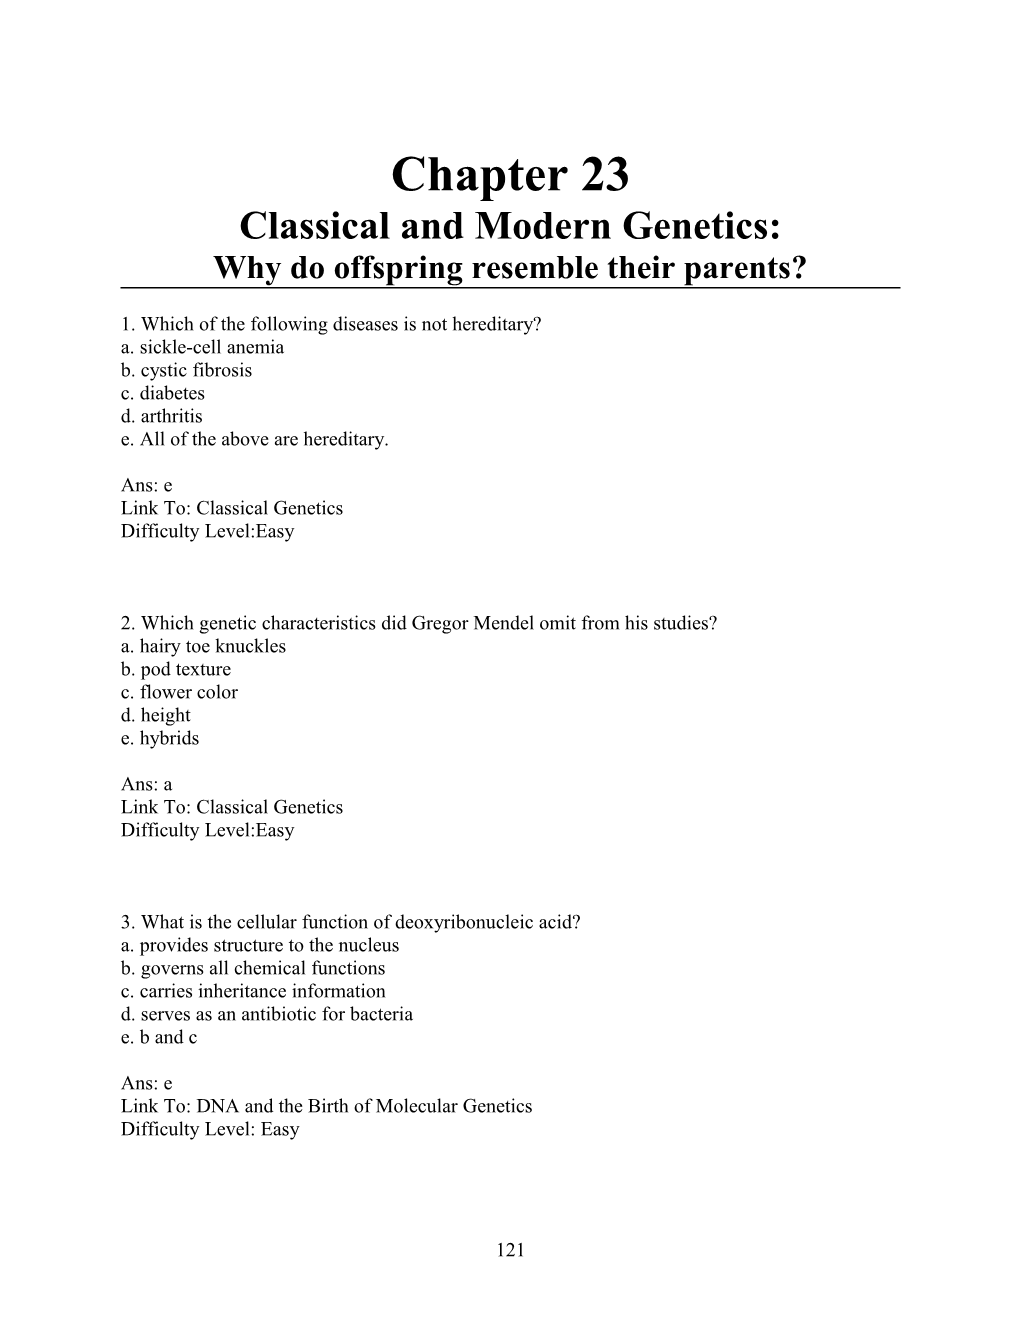 Chapter 23: Classical and Modern Genetics